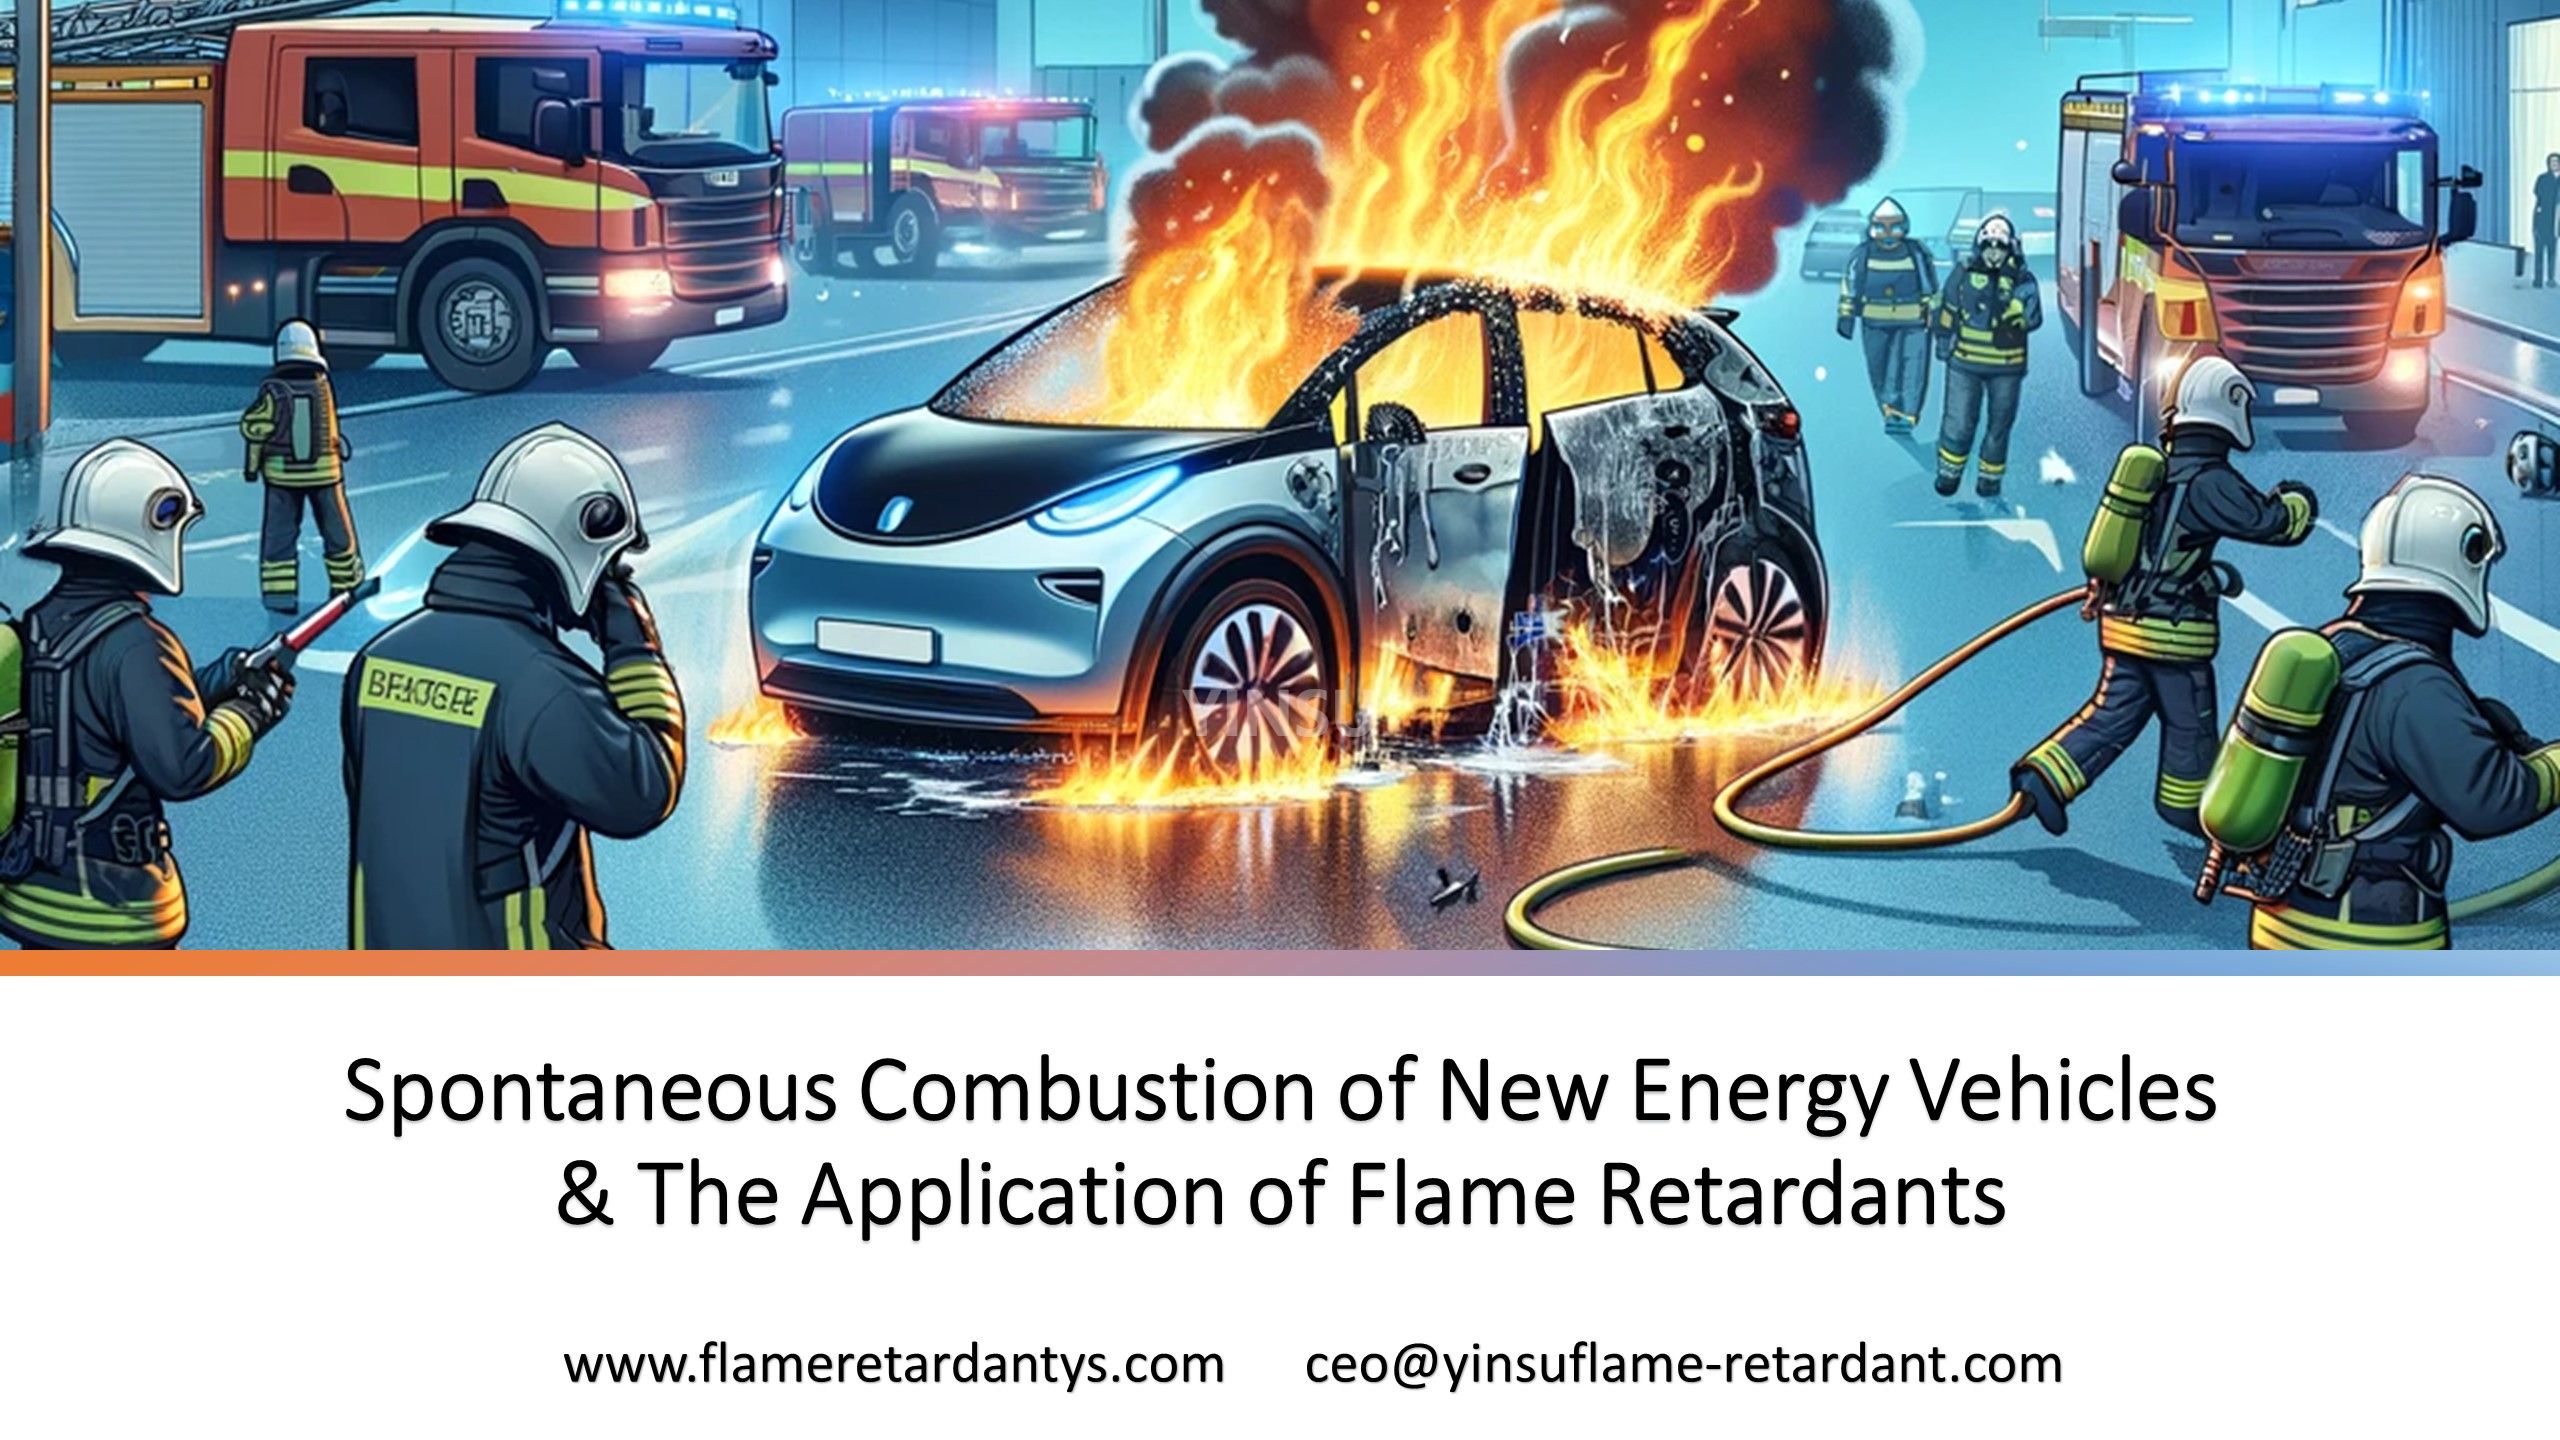 4.1 Spontaneous Combustion of New Energy Vehicles & The Application of Flame Retardants